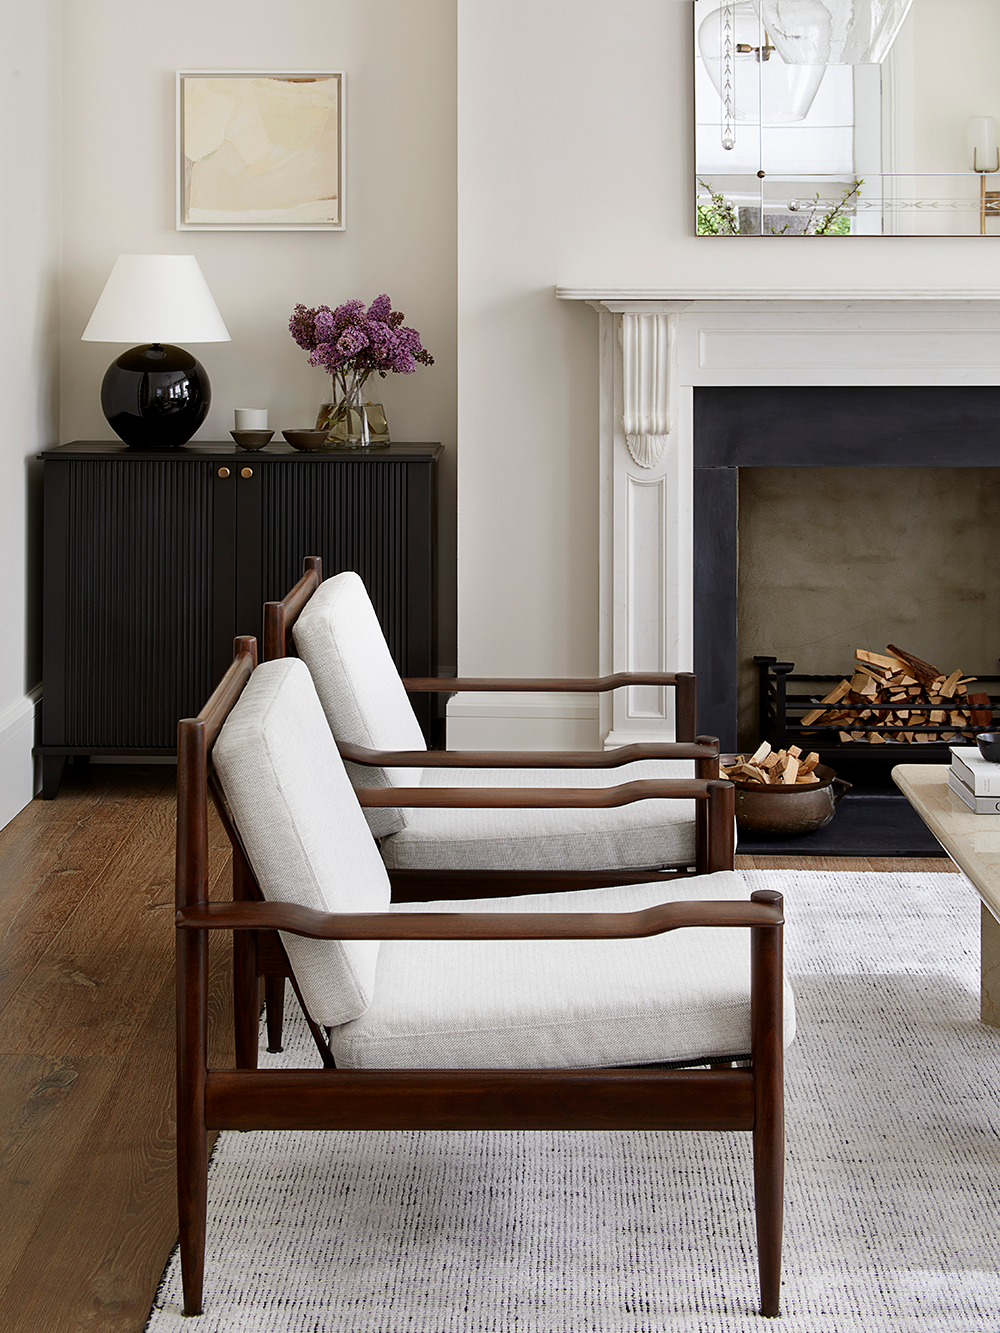 A period fireplace with antique armchairs and bespoke cabinet